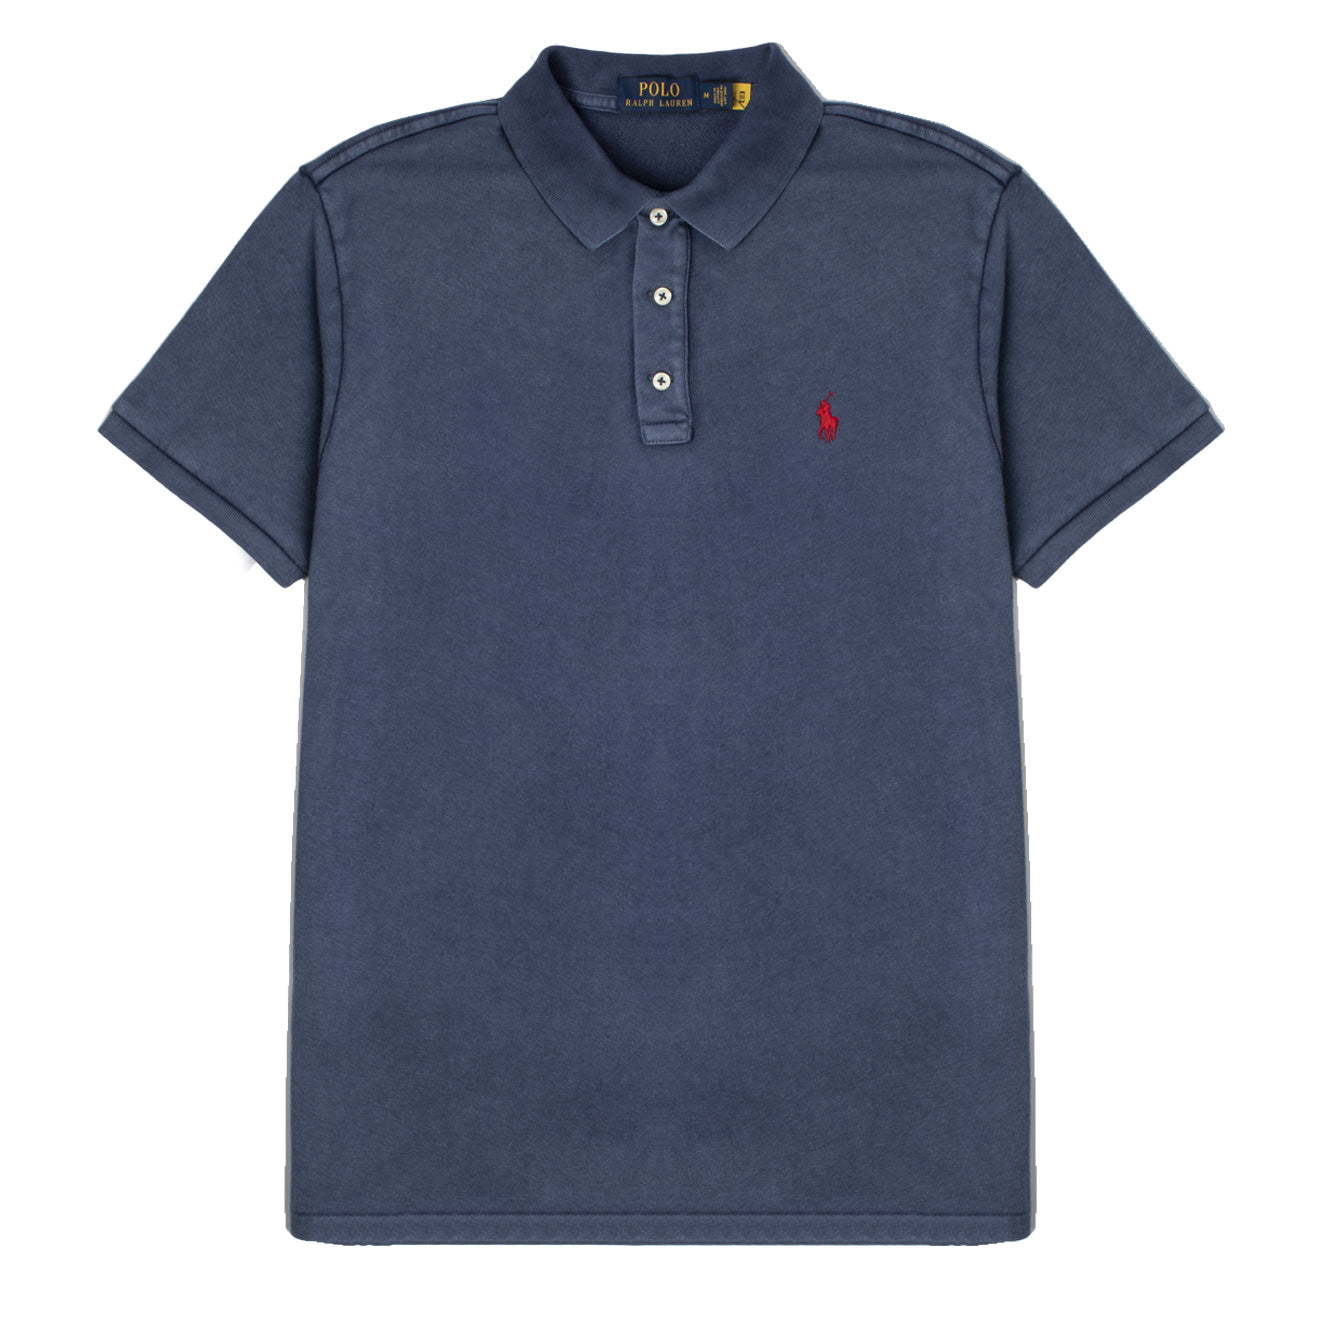 Polo Ralph Lauren Classic S/S Polo Light Navy | The Sporting Lodge